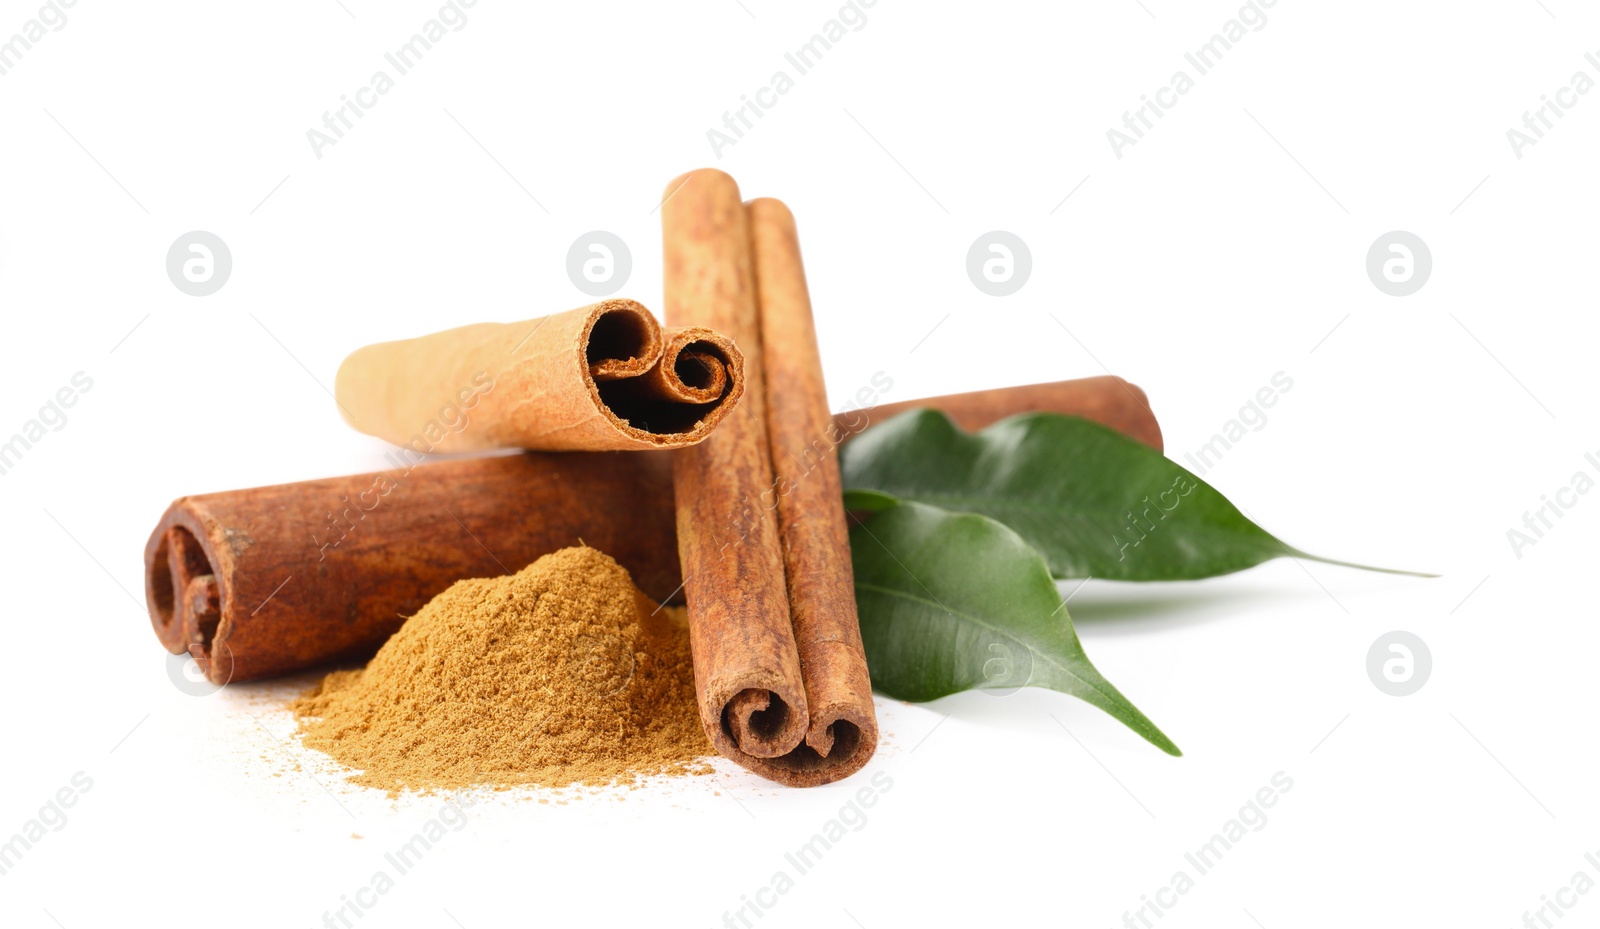 Photo of Dry aromatic cinnamon sticks, powder and green leaves isolated on white